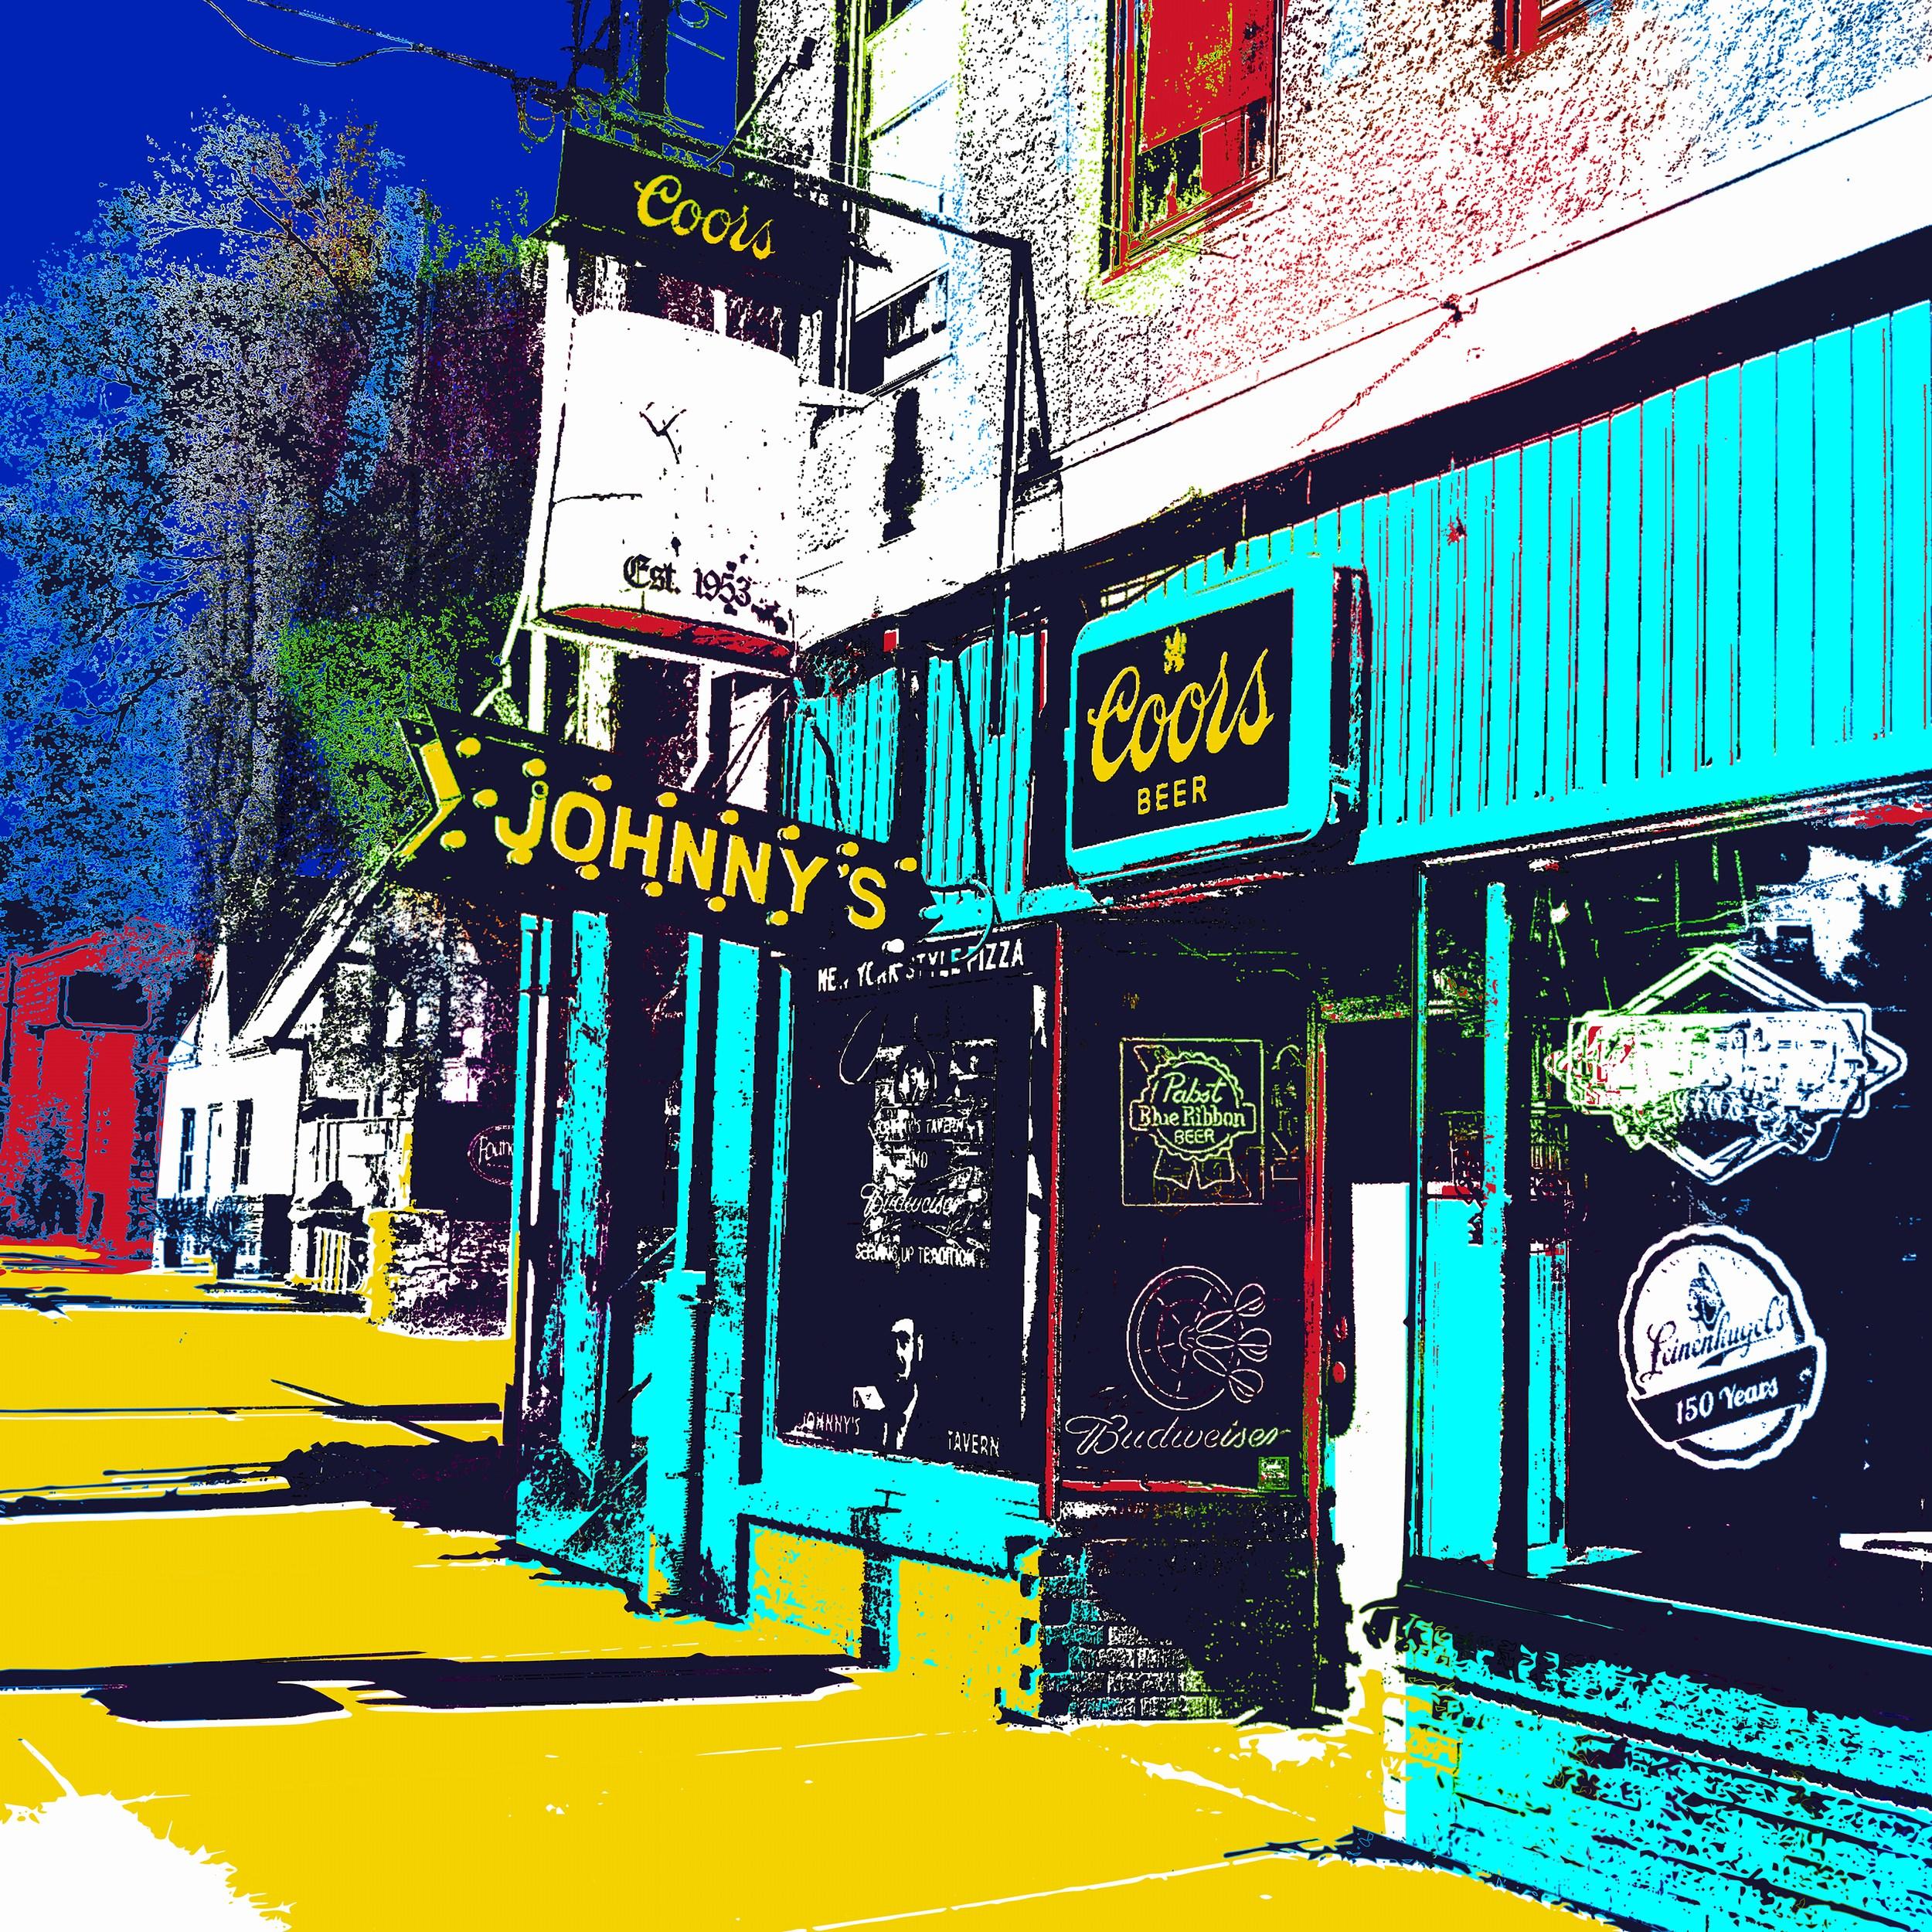 Katrina Revenaugh
“Johnny’s Tavern Lawrence, KS”
Dye Sublimation Print on Aluminum, 2024
Size Options: 12 x 12 inches, 20 x 20 inches or 30 x 30 inches
Edition: 75 + AP
Signed and titled on label provided separately
COA included

Tags: